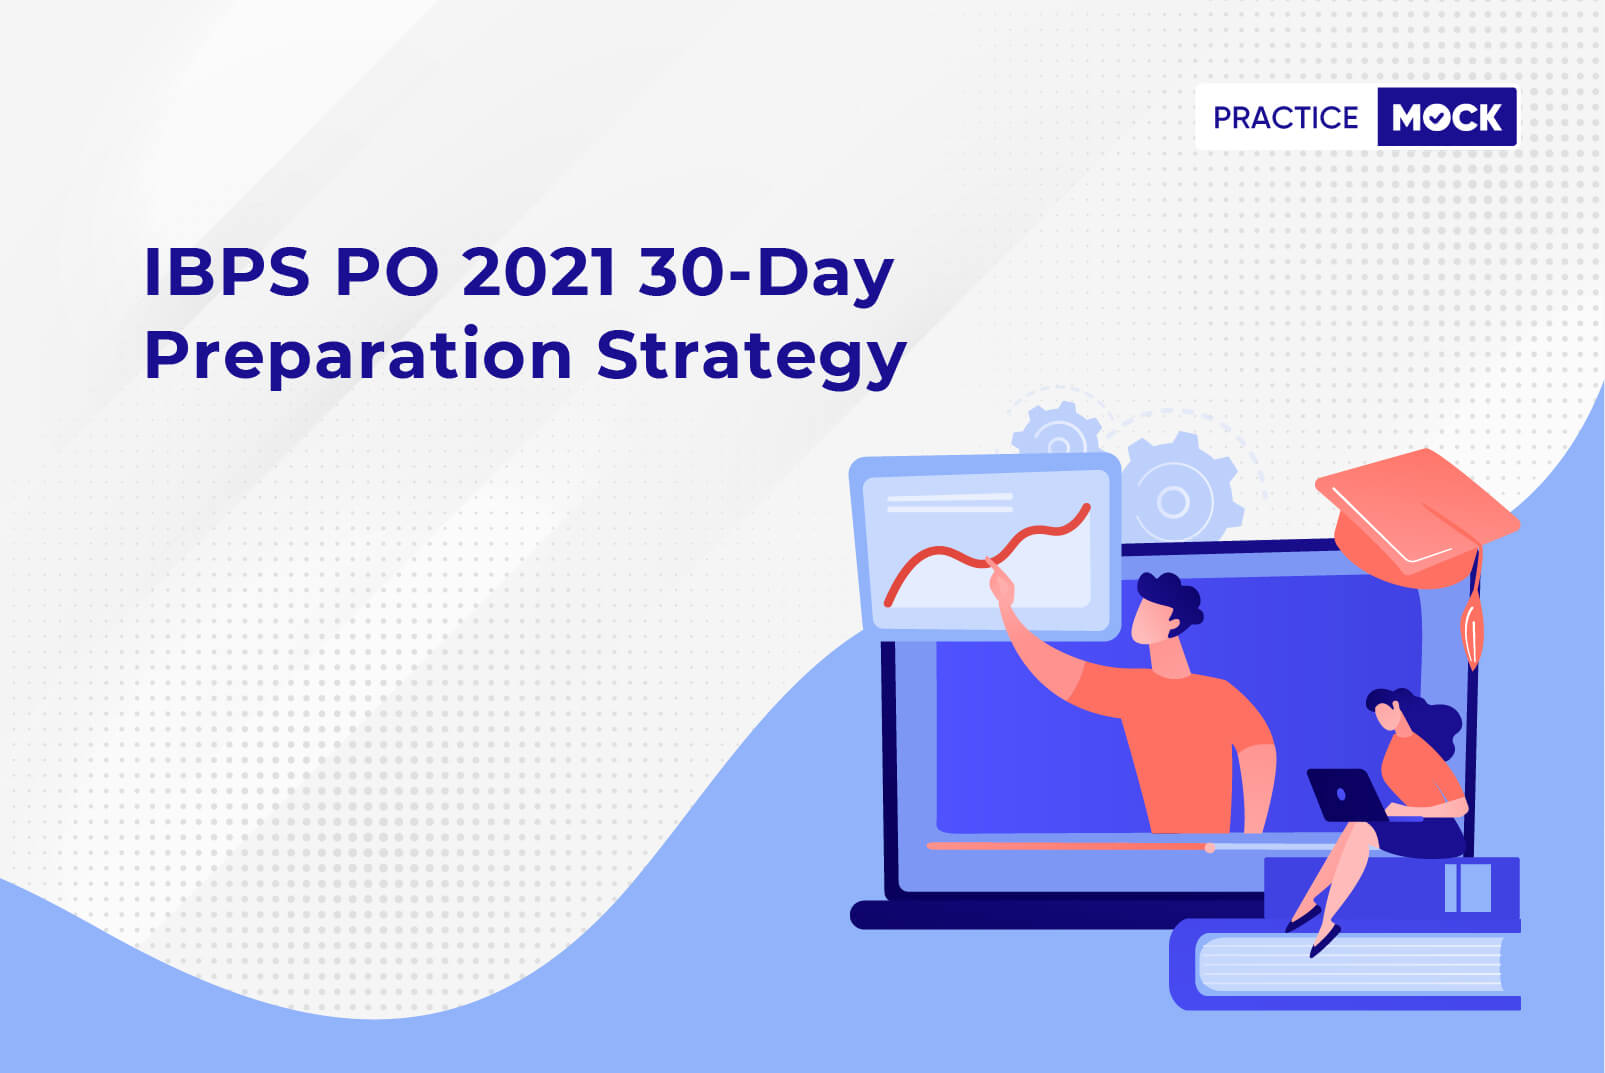 How to crack IBPS PO in 30 days